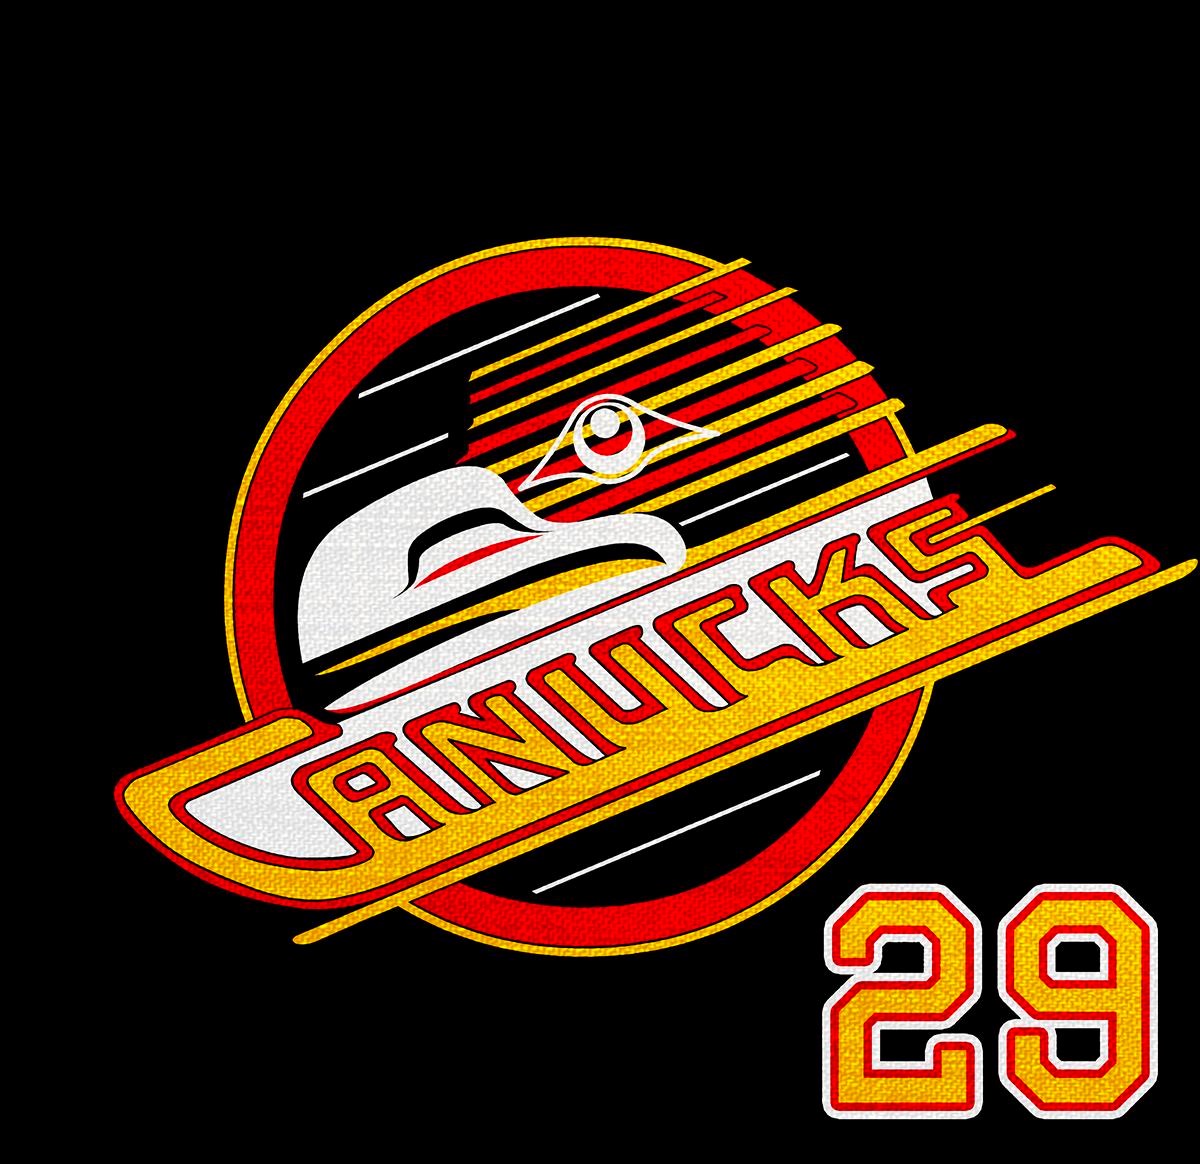 Vancouver Canucks jerseys pay tribute to Gino Odjick for First Nations  Celebration game